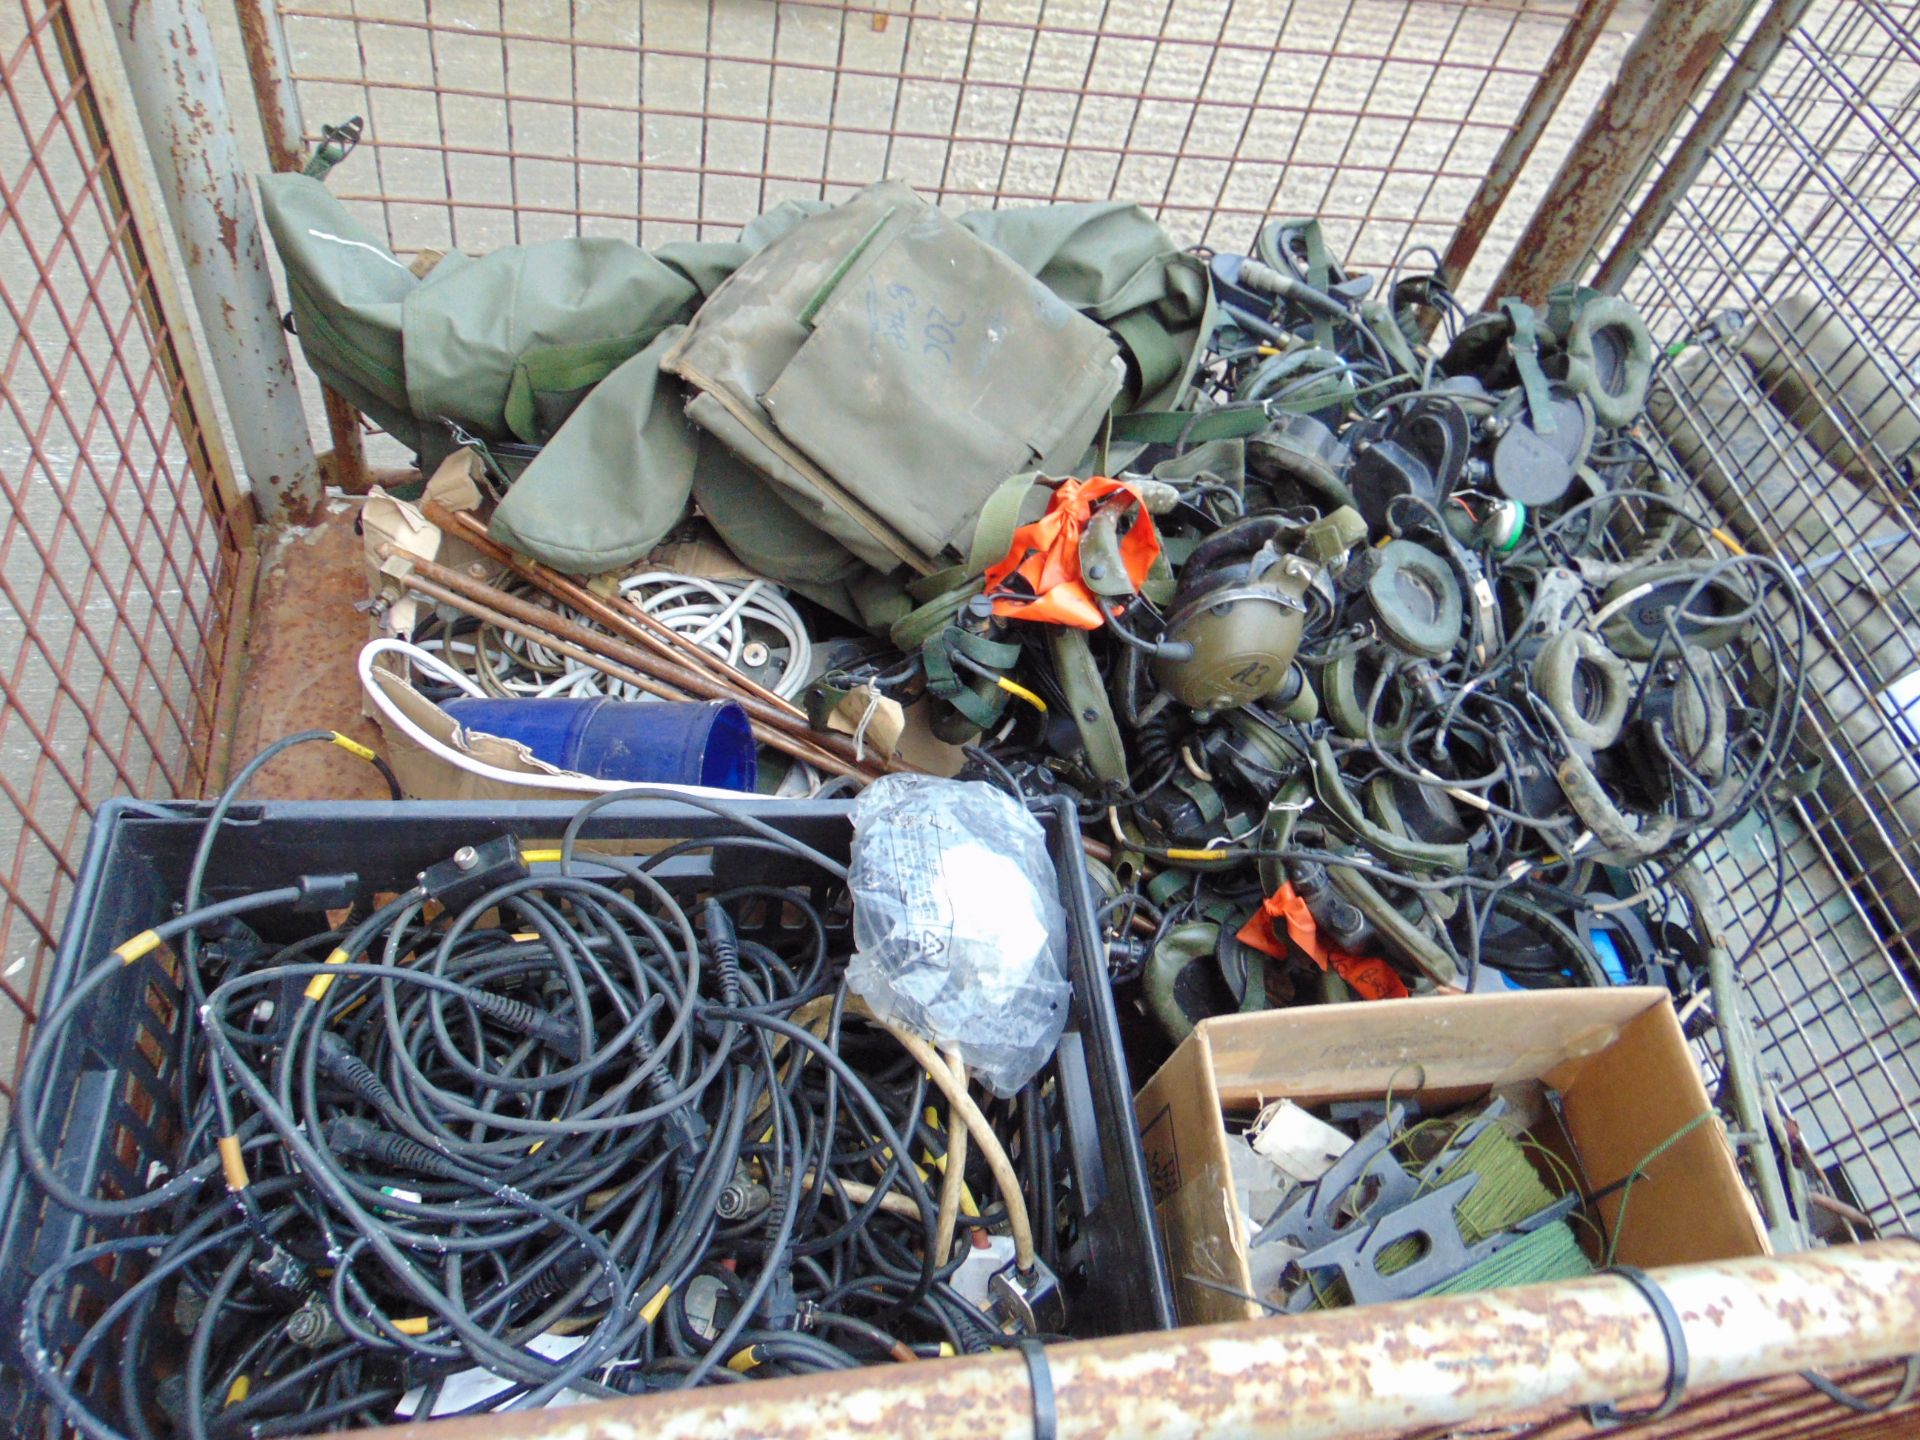 1x Stillage of Clansman Cables Headsets, Antennas Etc - Image 5 of 5